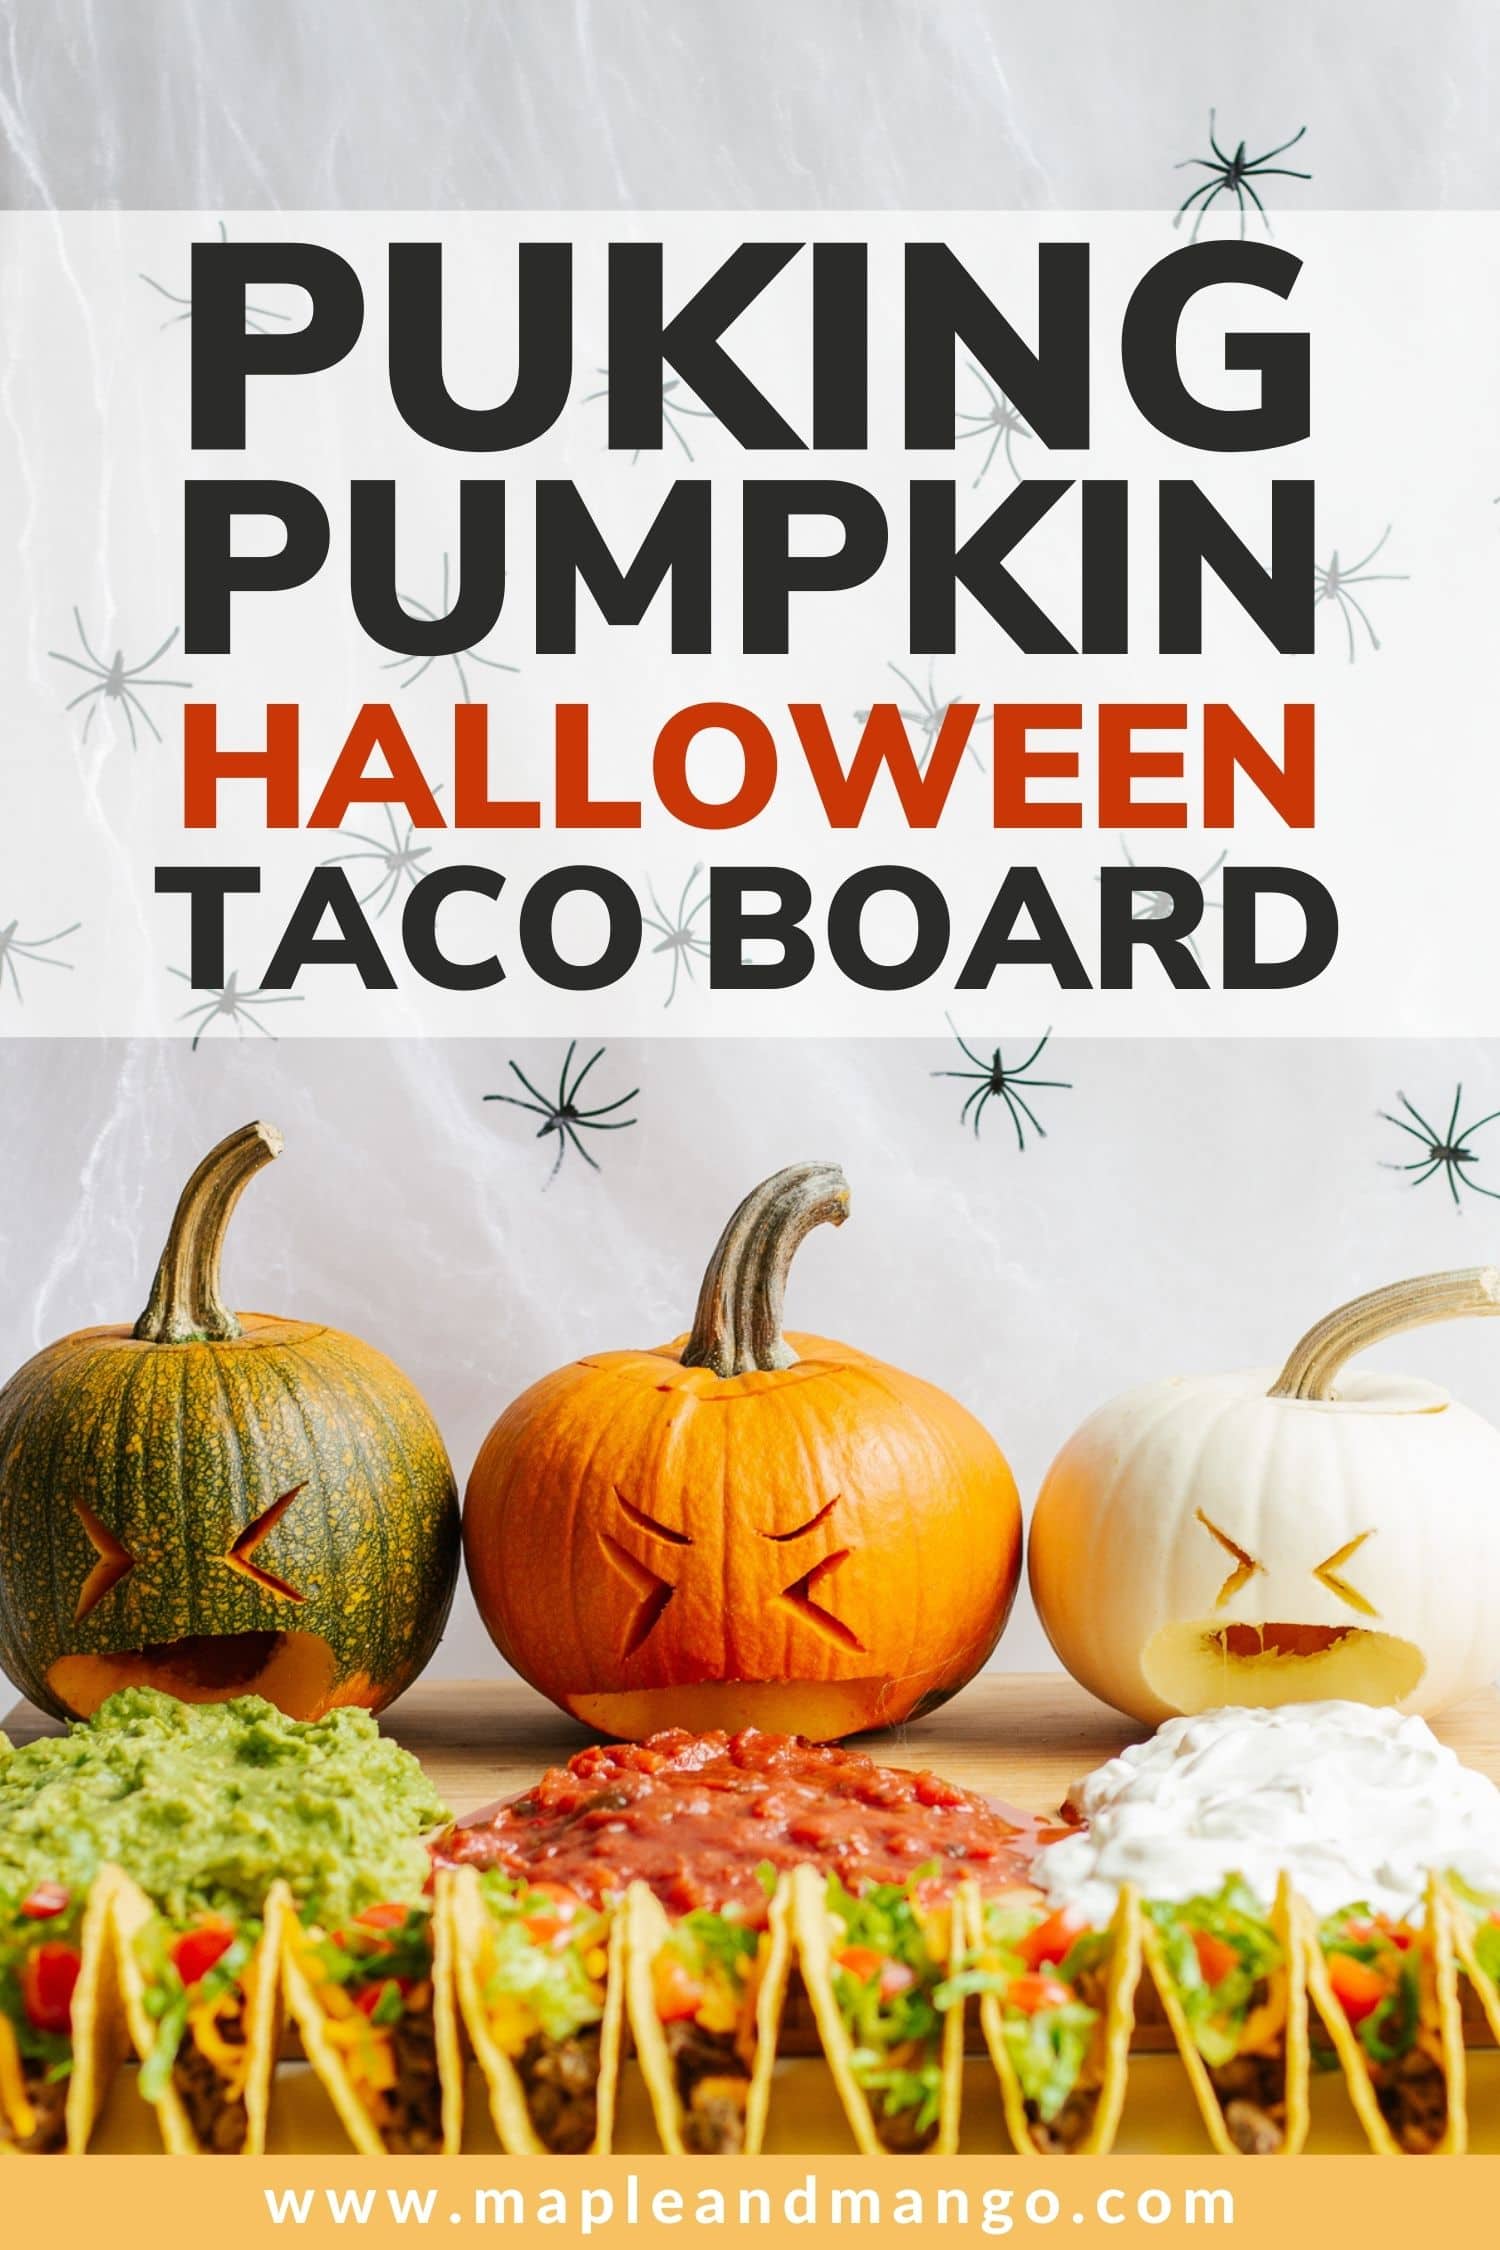 Pinterest graphic with text overlay "Puking Pumpkin Halloween Taco Board"